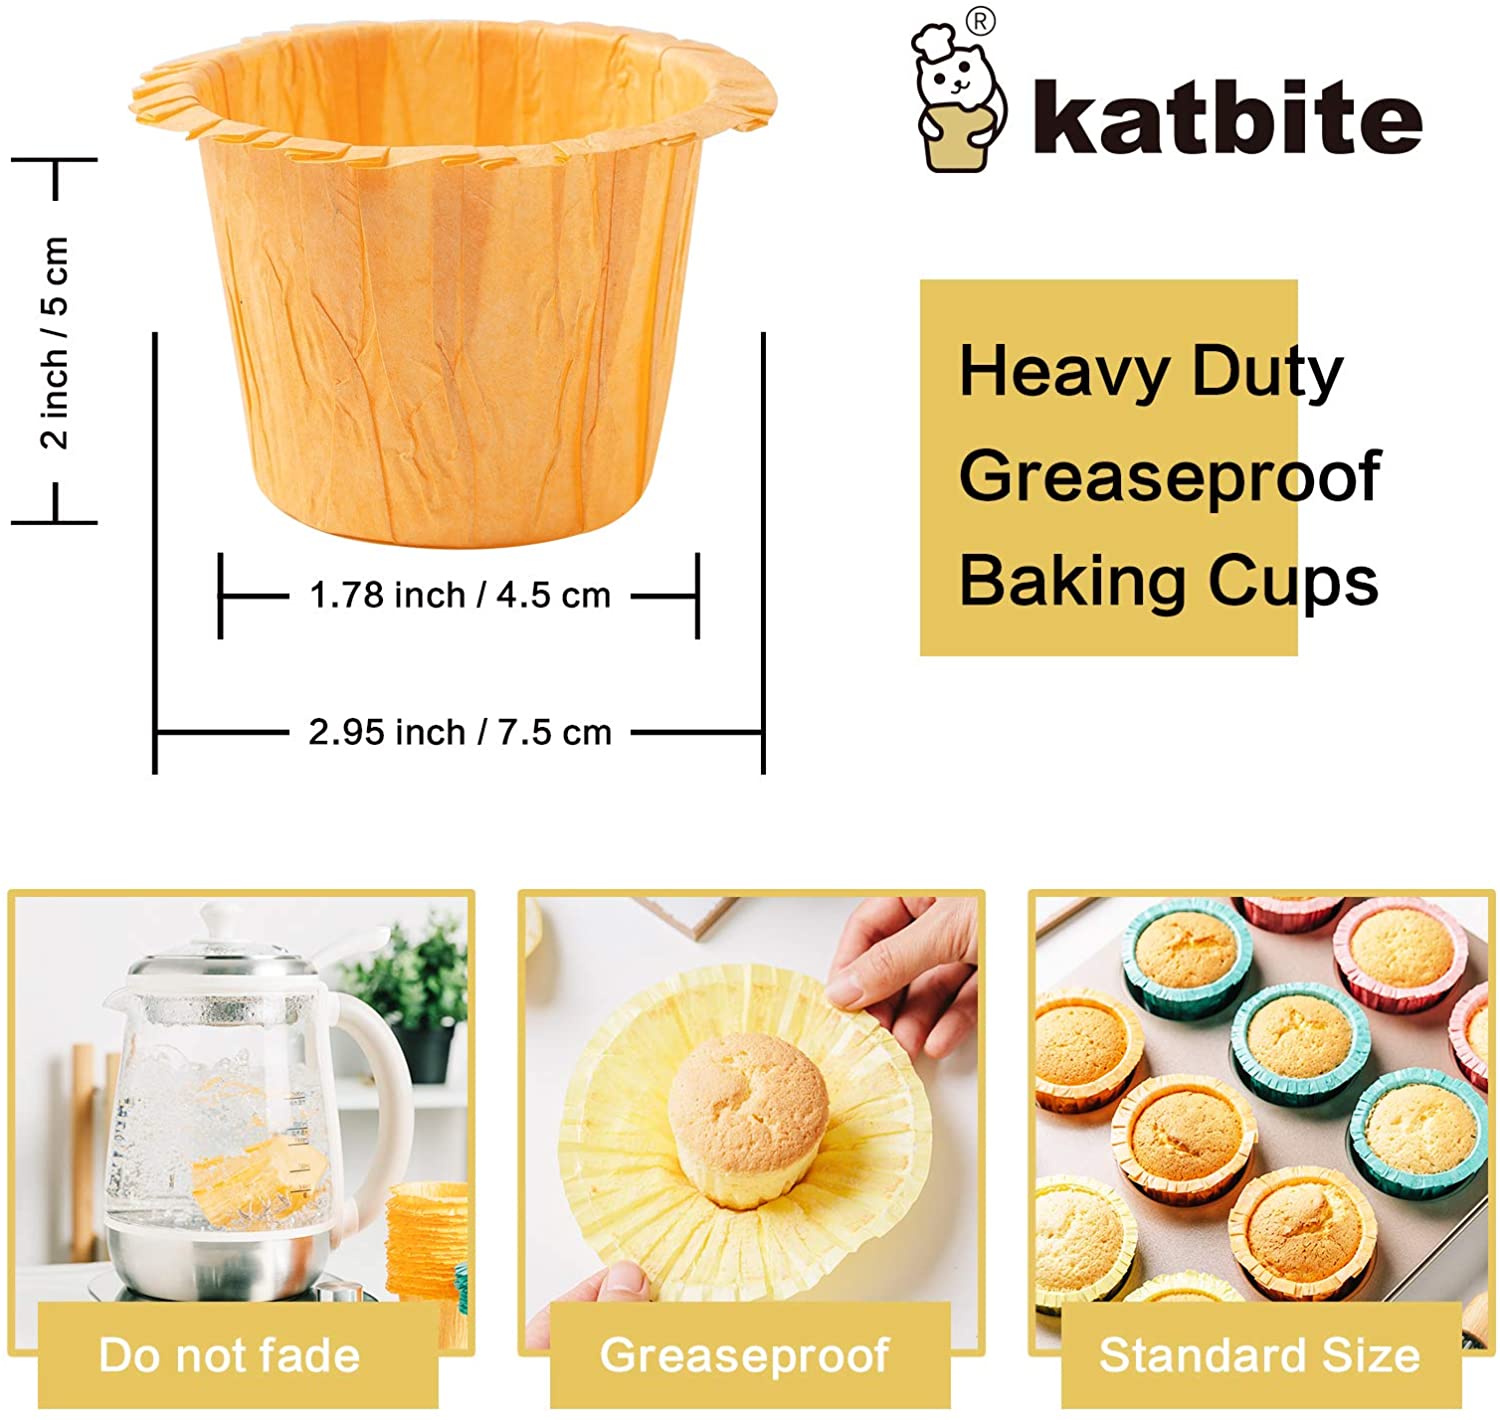 Katbite Baking Cups Cupcake Liners Muffin Liners 150PCS